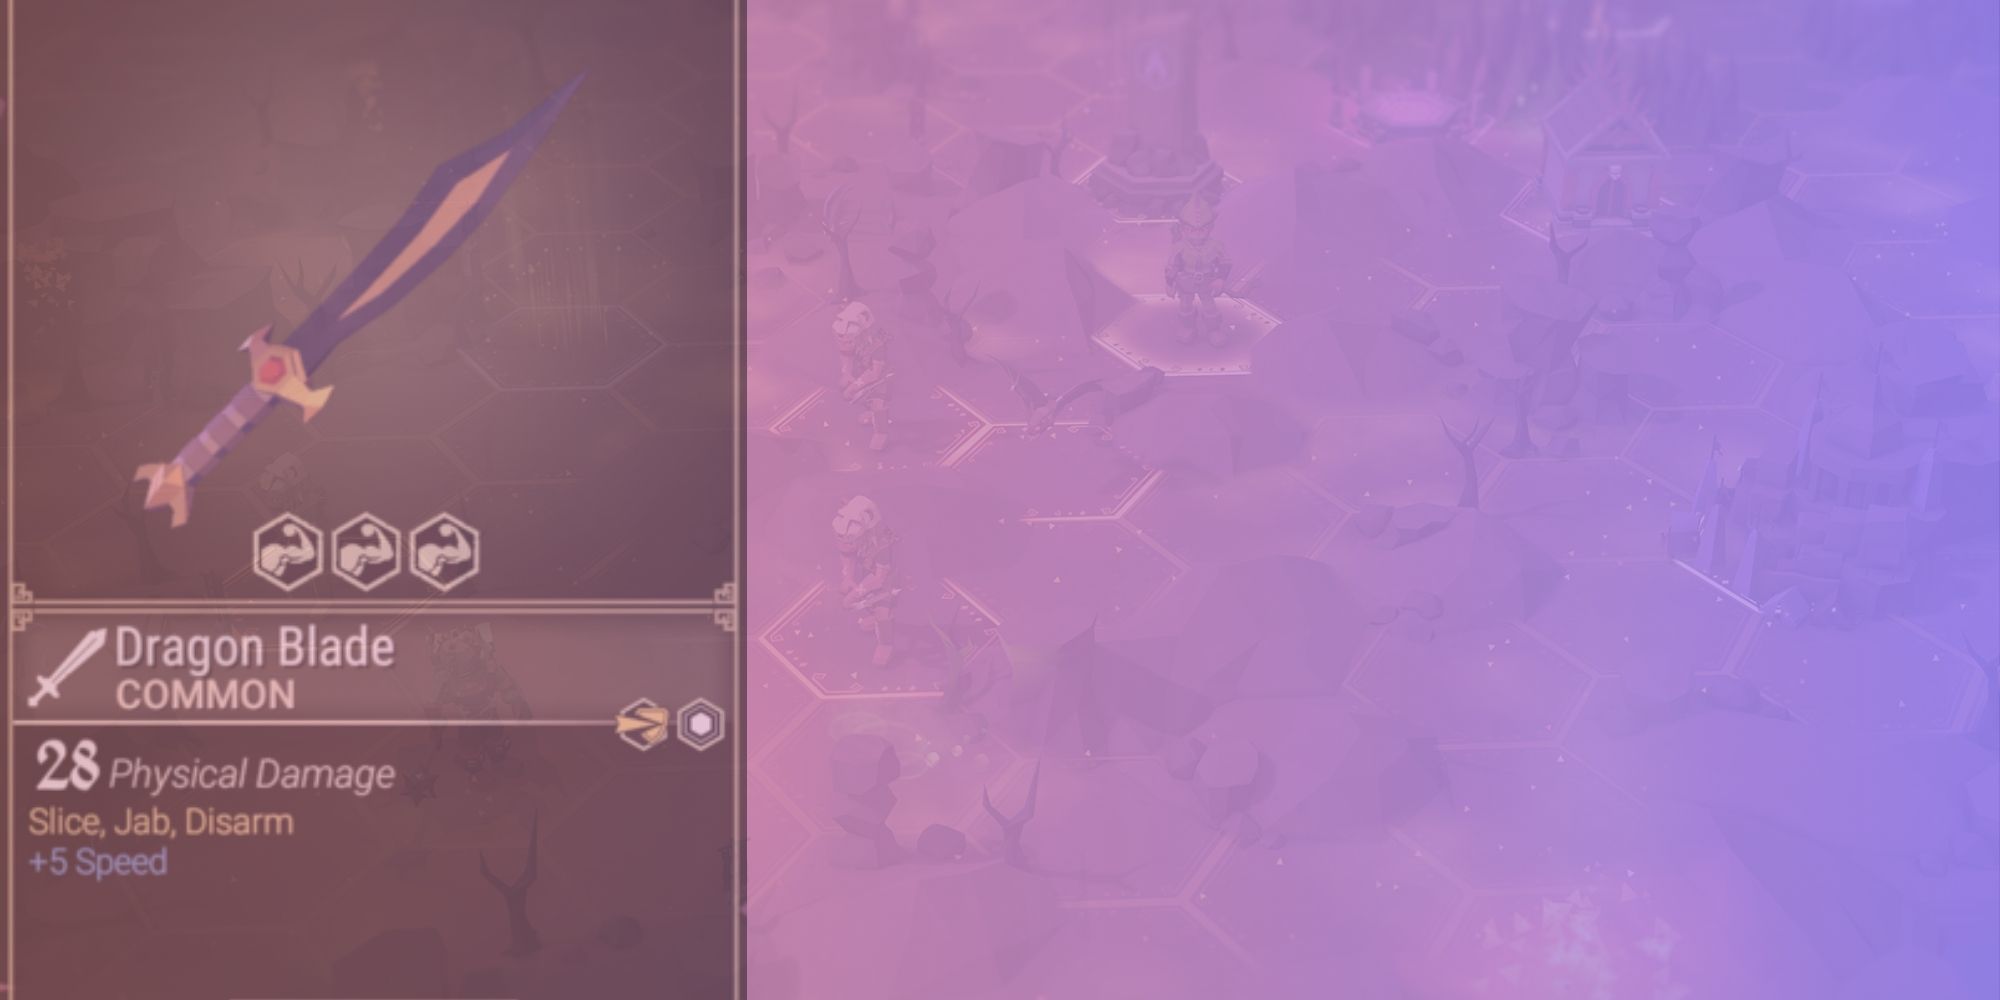 Dragon blade stats over a pink and purple gradient background